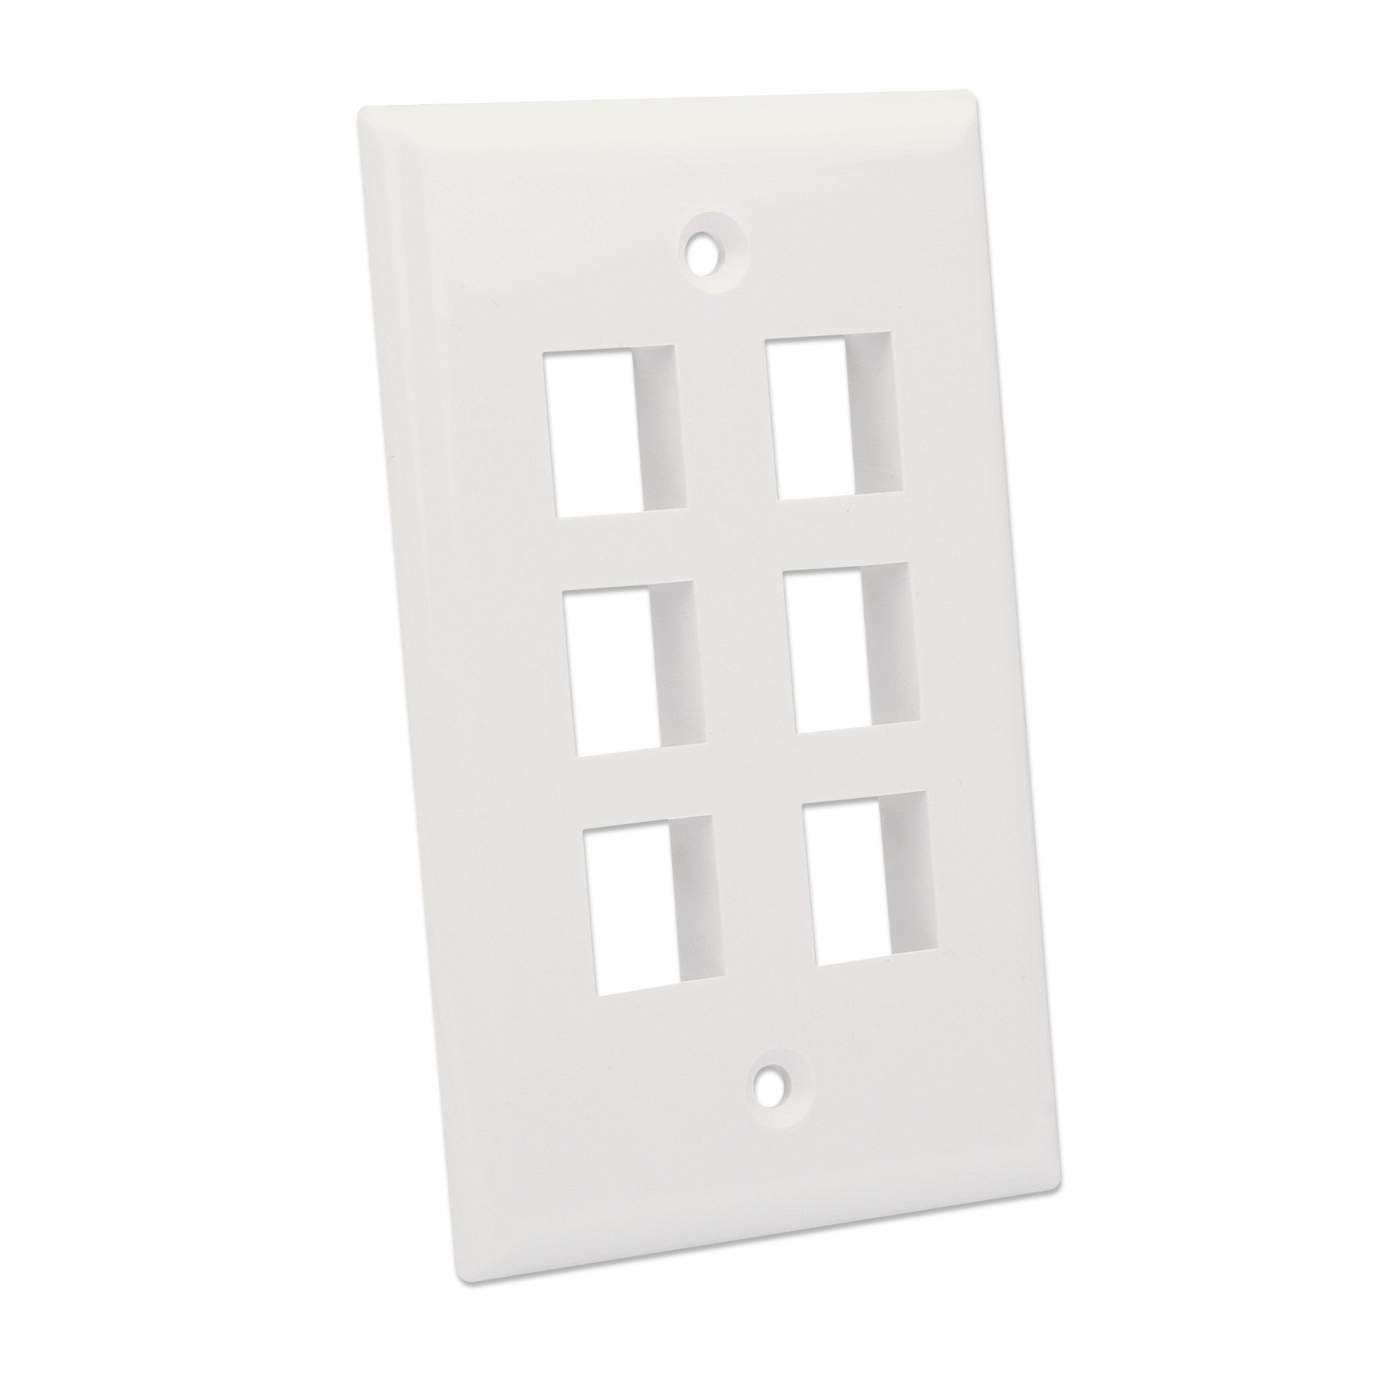 6-Outlet Keystone Wall Plate Image 2